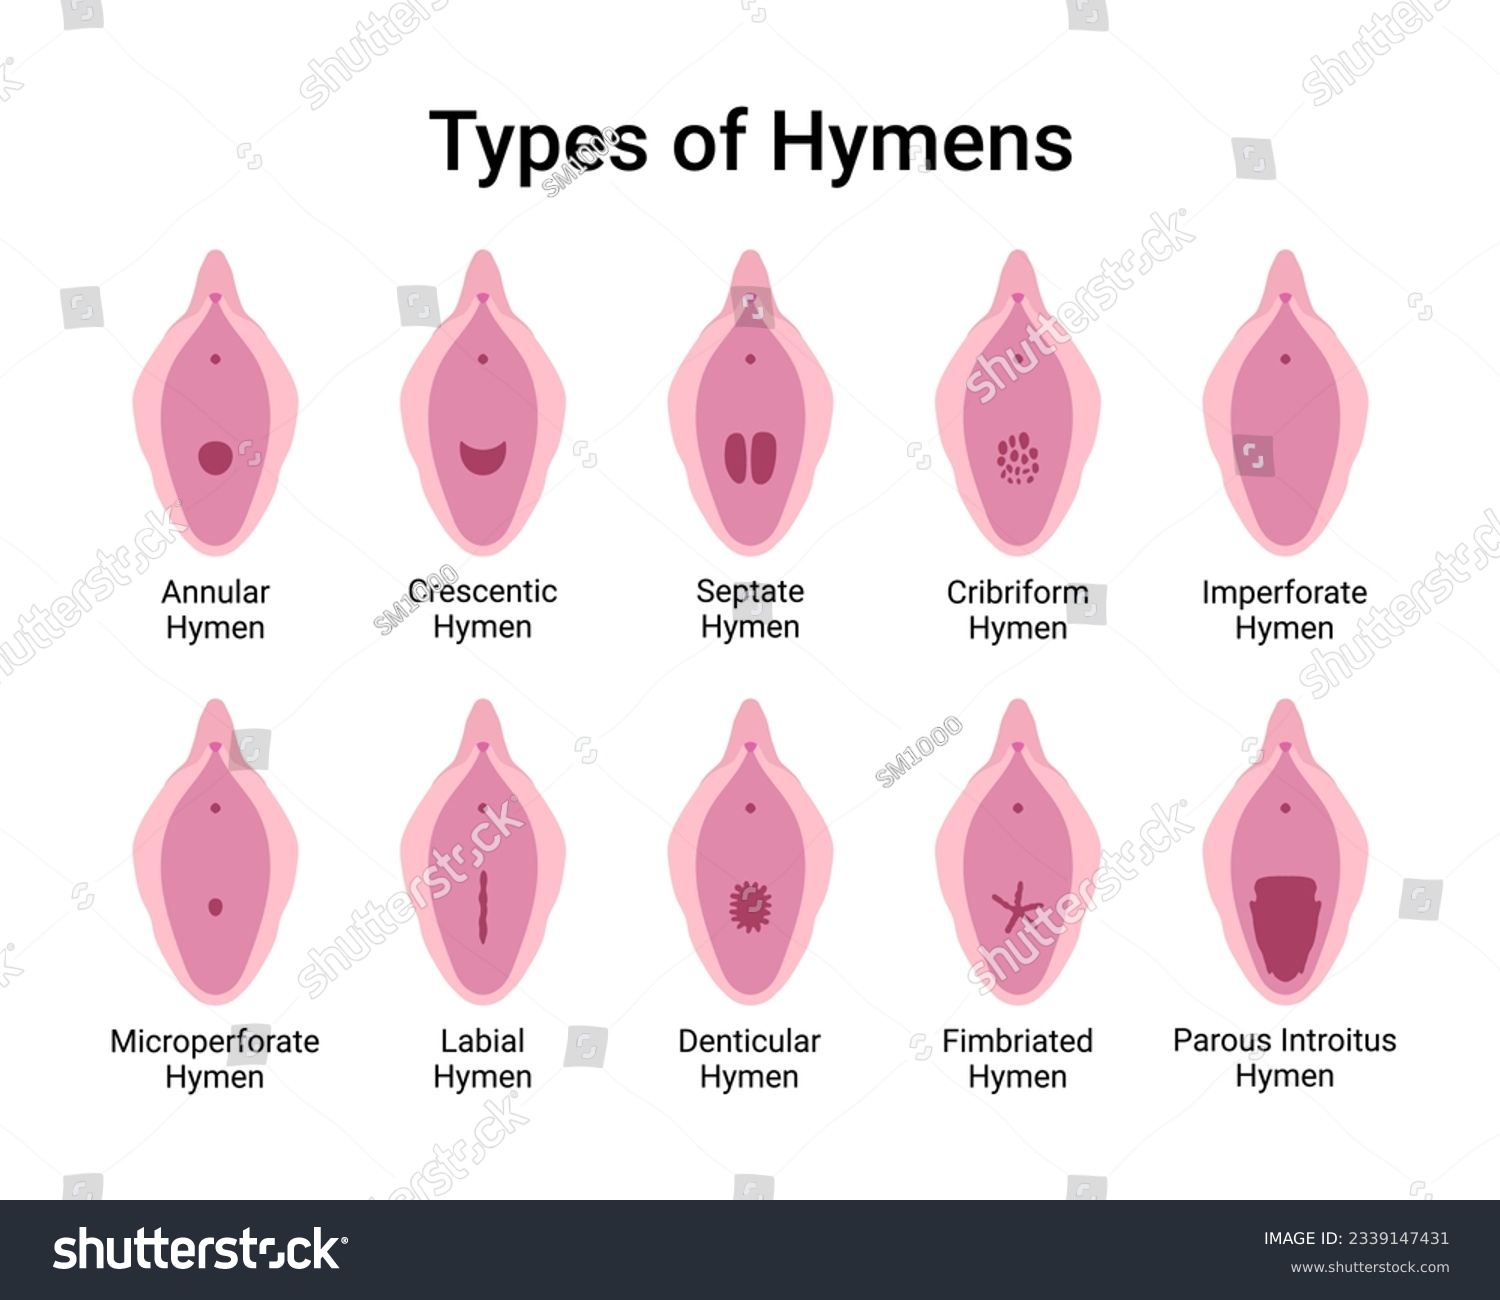 amy scott recommends picture of hymen pic